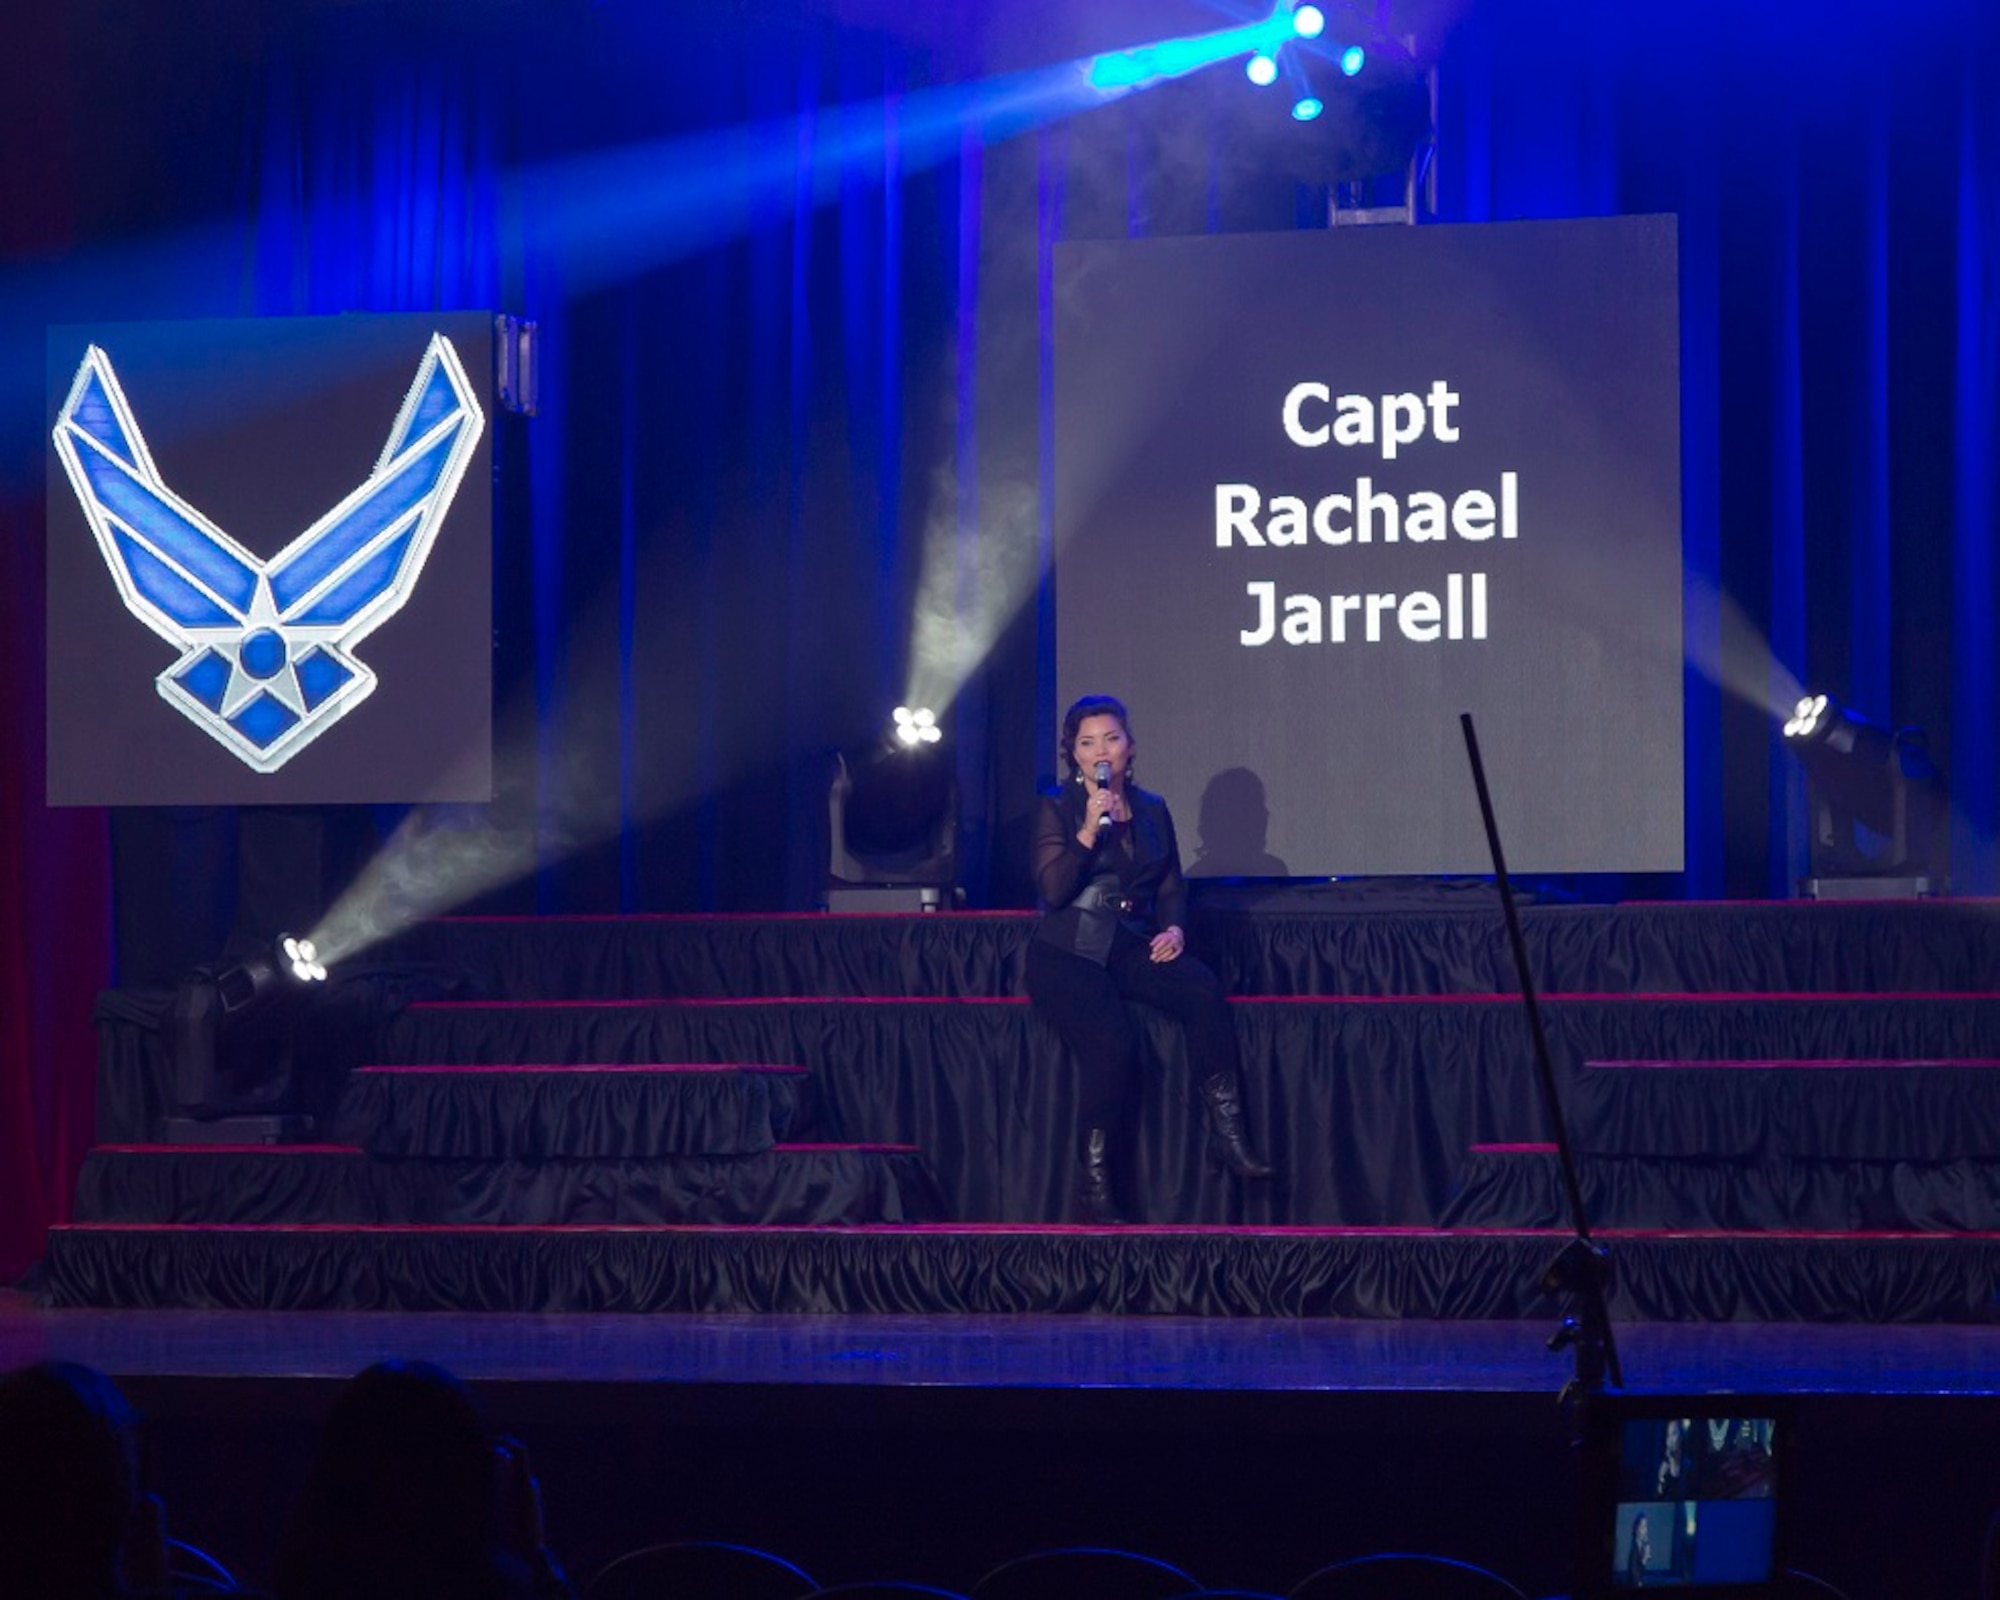 Capt. Rachael Jarrell of the 7th Logistics Readiness Squadron at Dyess Air Force Base, Texas, placed first in the #VocalUpload contest. She sang Demi Lovato’s “Stone Cold.” (U.S. Air Force photo by Lee Schwabe)